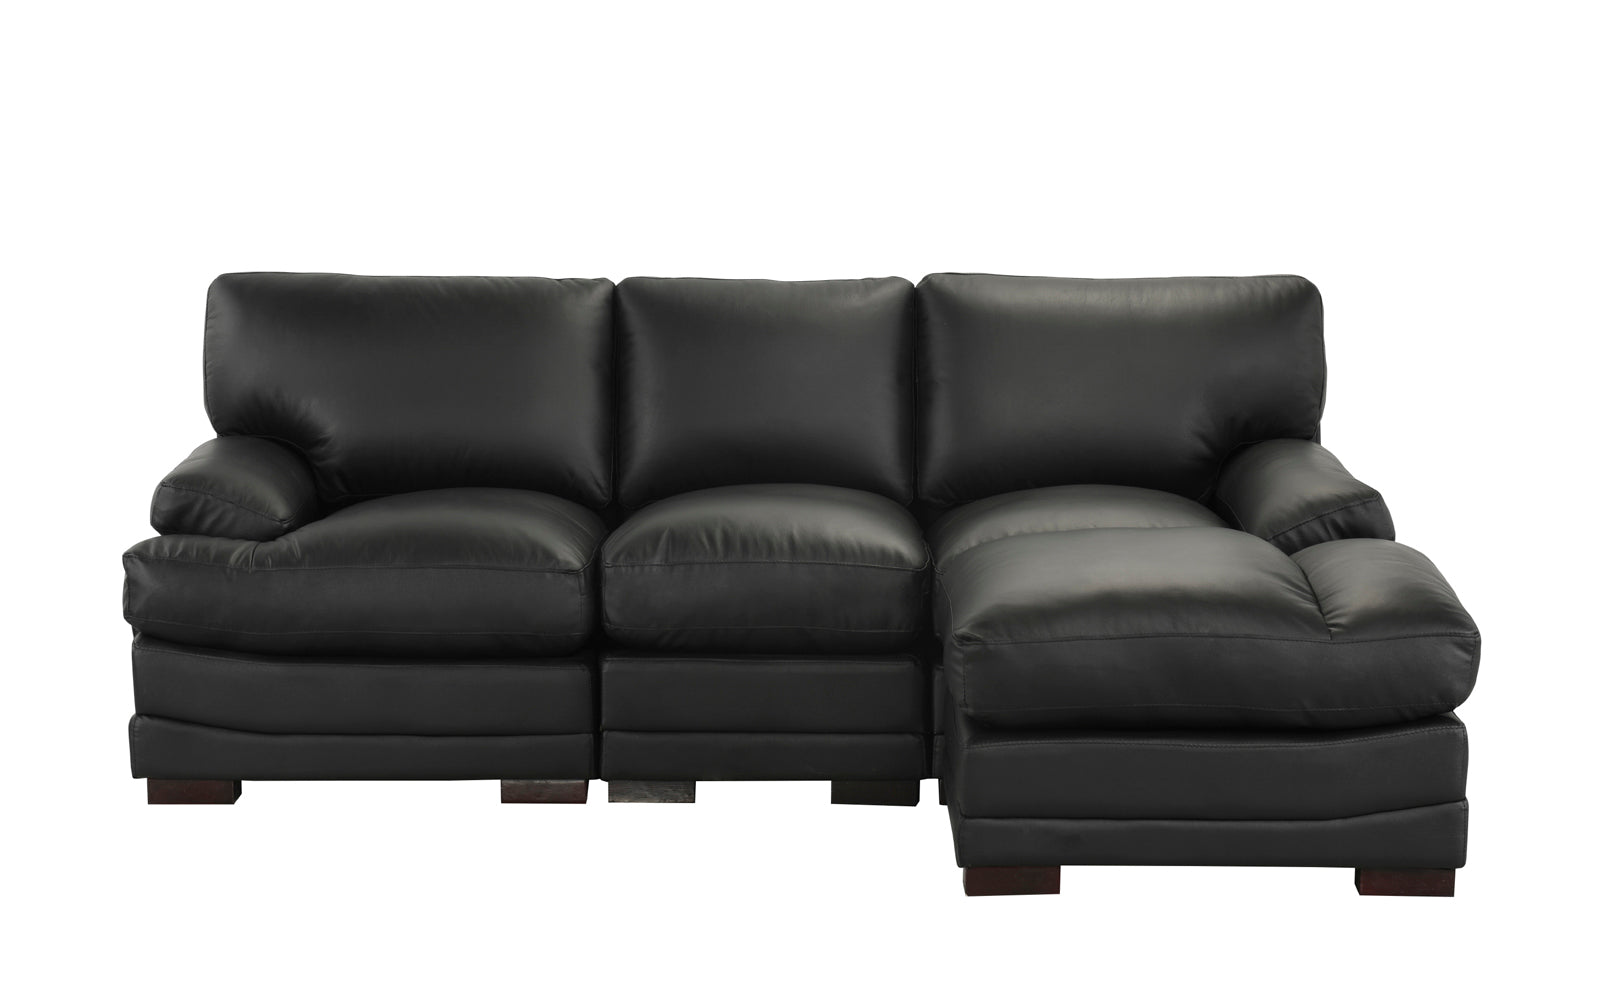 Silas Leather Match Sectional Sofa With Right Facing Chaise